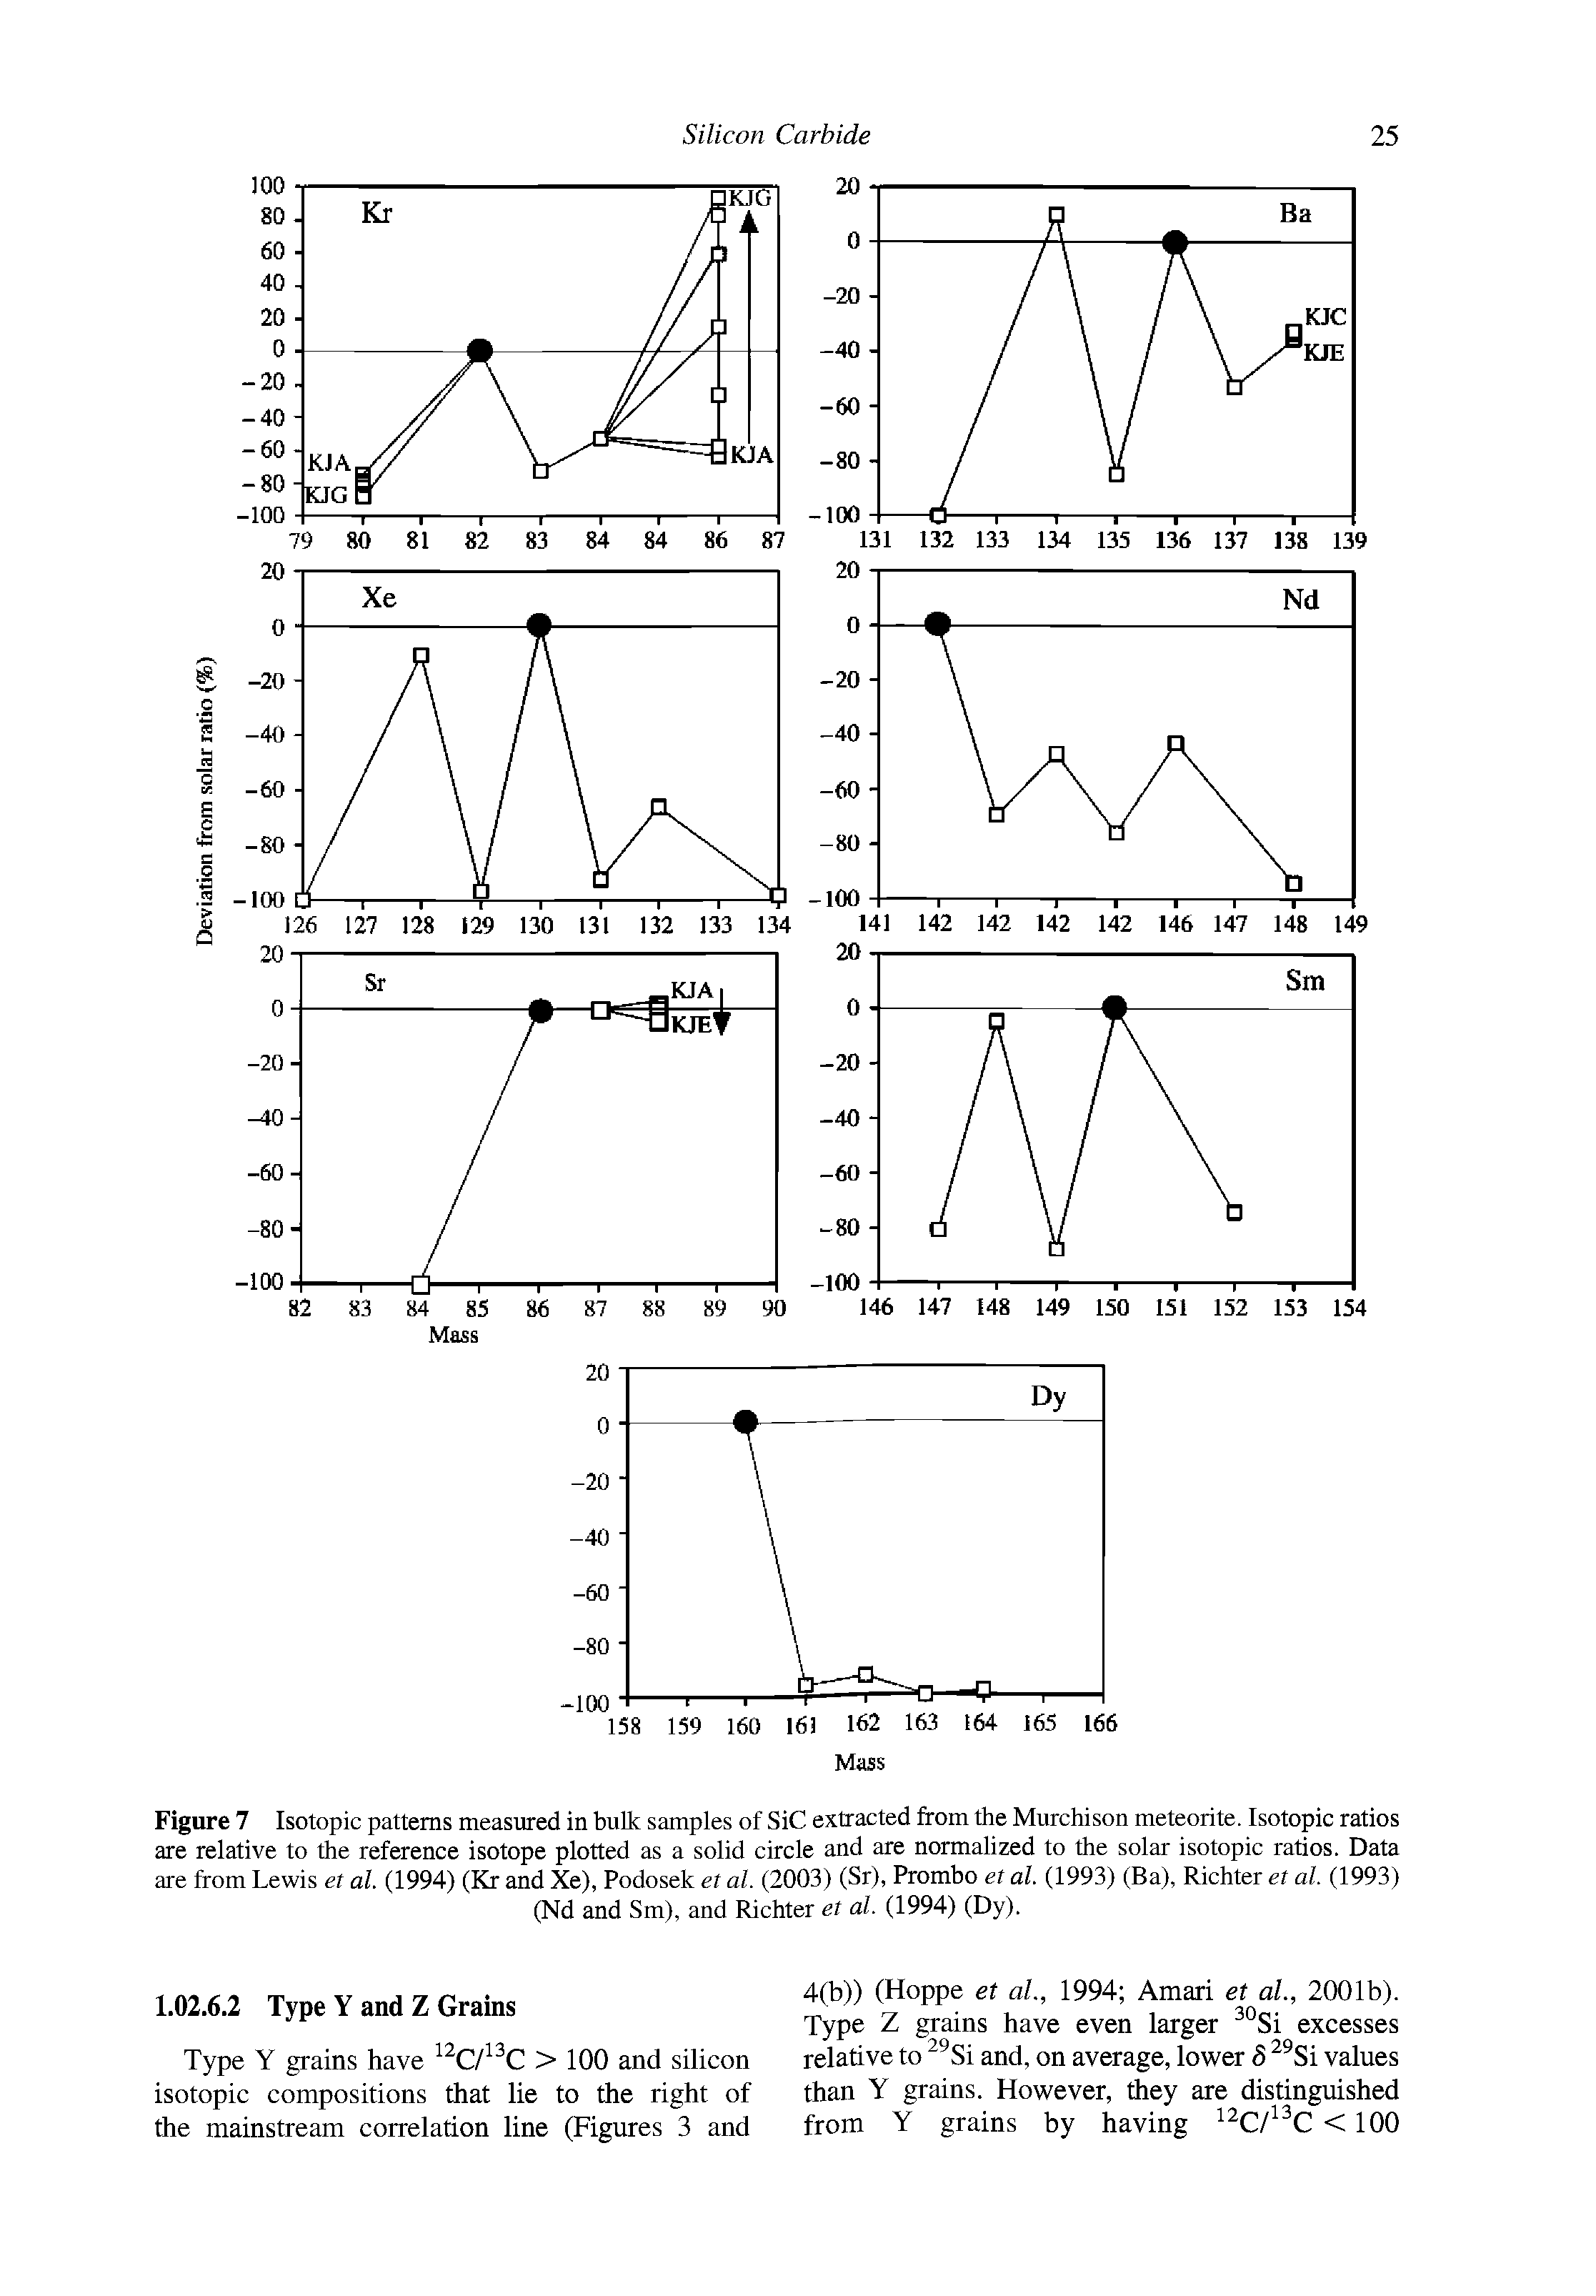 Figure 7 Isotopic patterns measured in bulk samples of SiC extracted from the Murchison meteorite. Isotopic ratios are relative to the reference isotope plotted as a solid circle and are normalized to the solar isotopic ratios. Data are from Lewis et al. (1994) (Kr and Xe), Podosek et al. (2003) (Sr), Prombo et al. (1993) (Ba), Richter et al. (1993)...